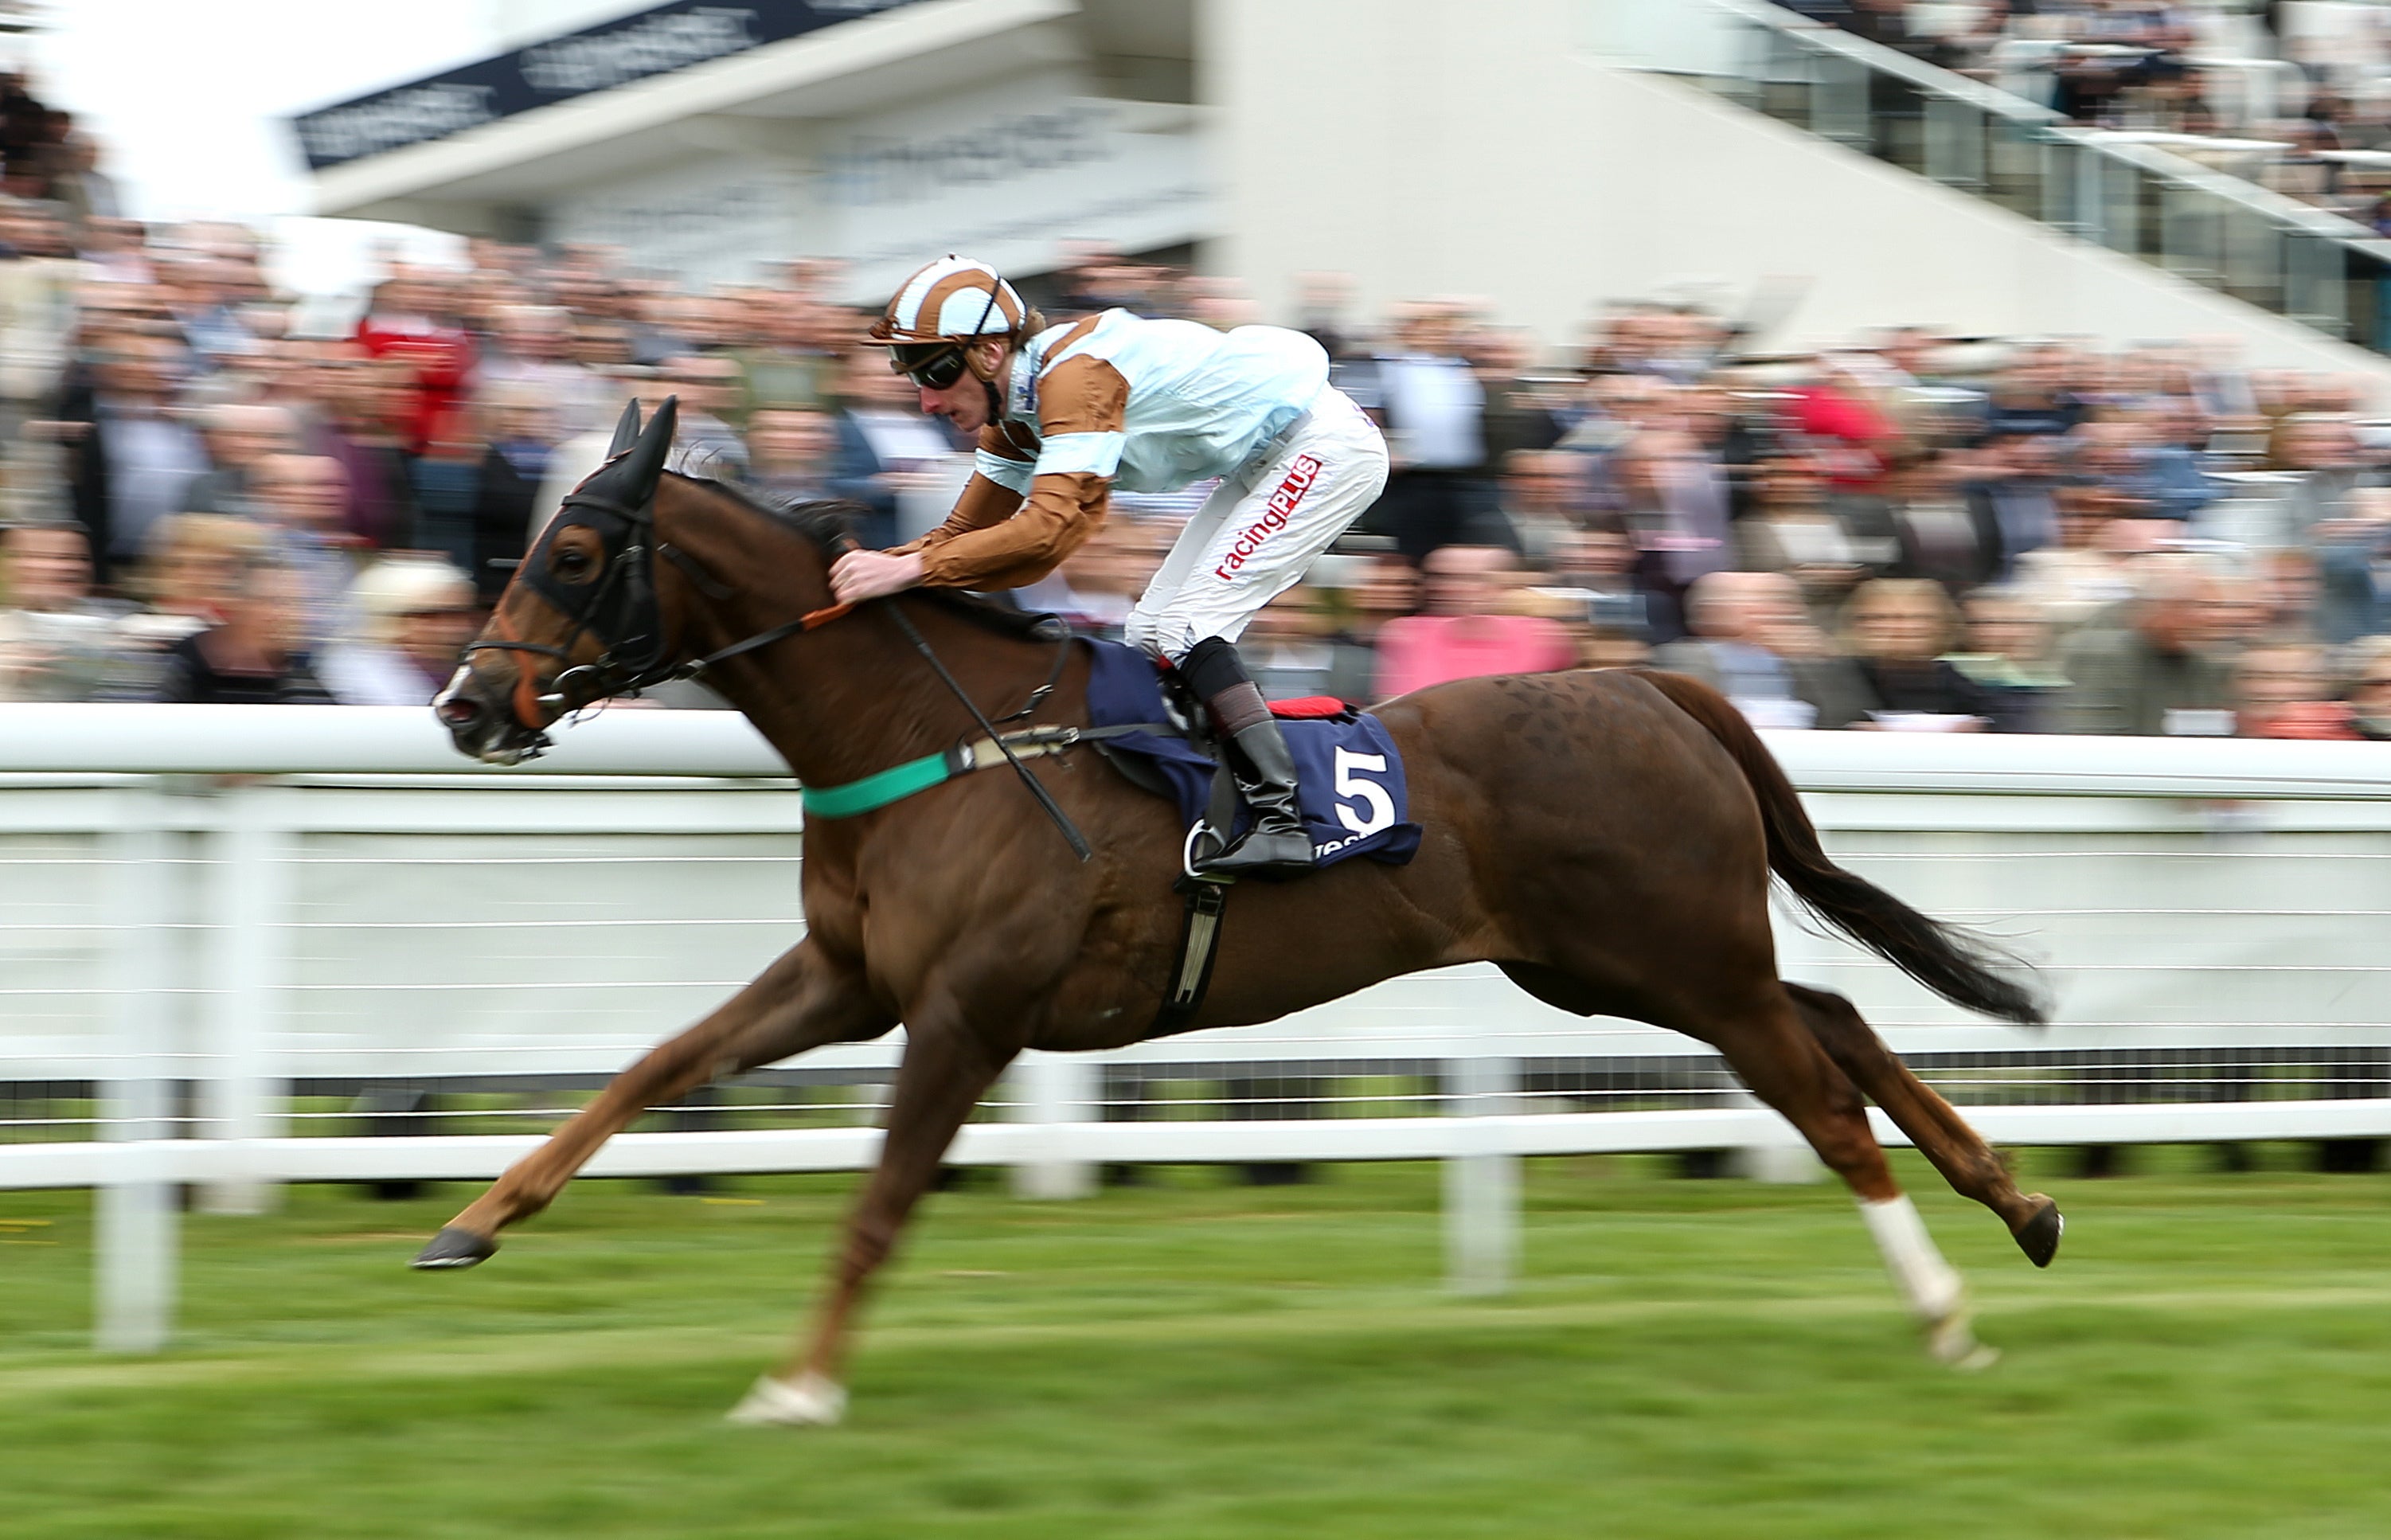 Caspian Prince bids to win the World Pool "Dash" Handicap at Epsom for a fourth time